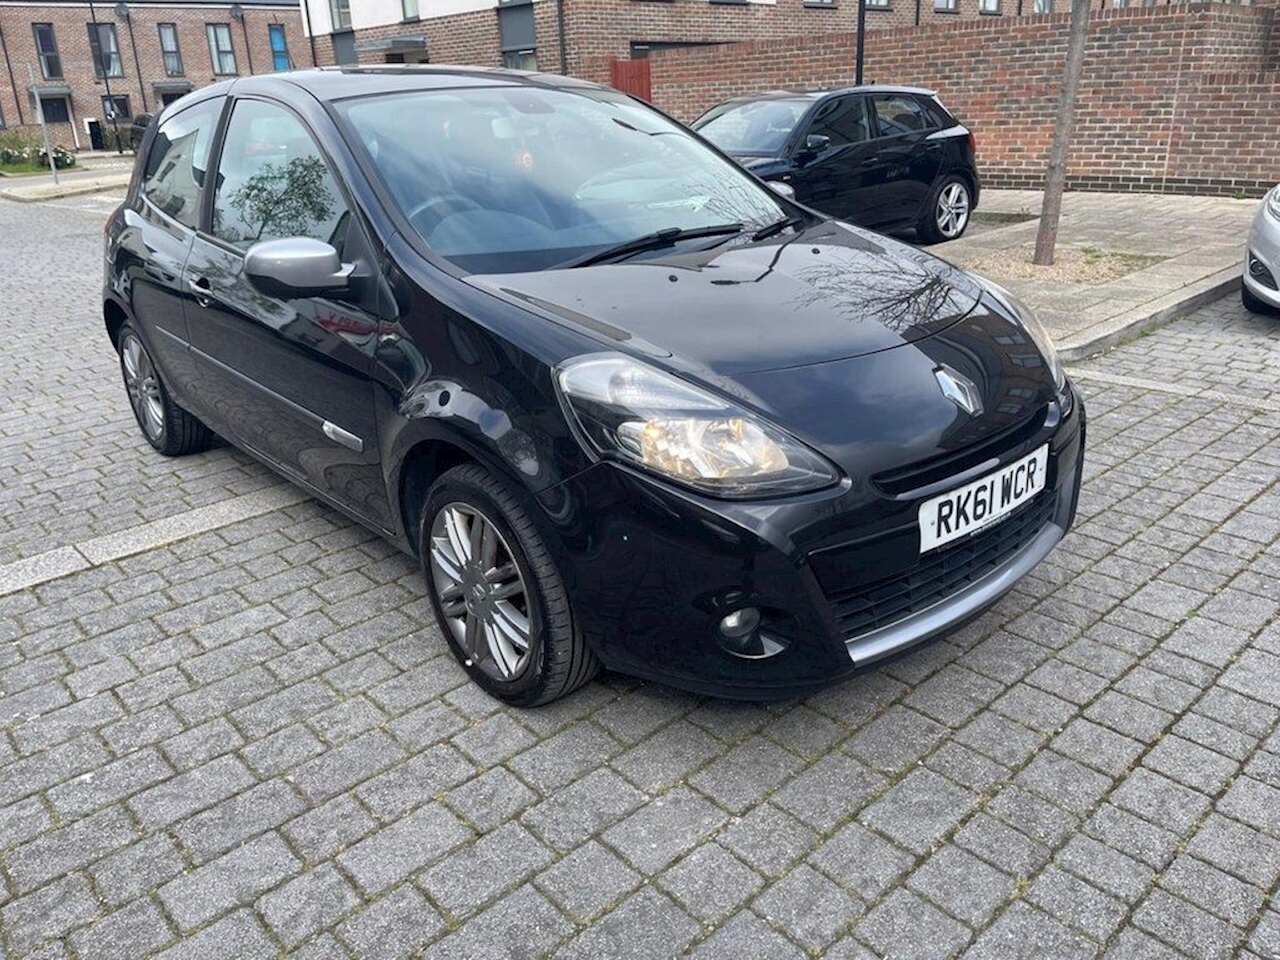 Neuken Trojaanse paard Product Used 2011 Renault Clio Dynamique TomTom For Sale (U13) | Car Station Ltd